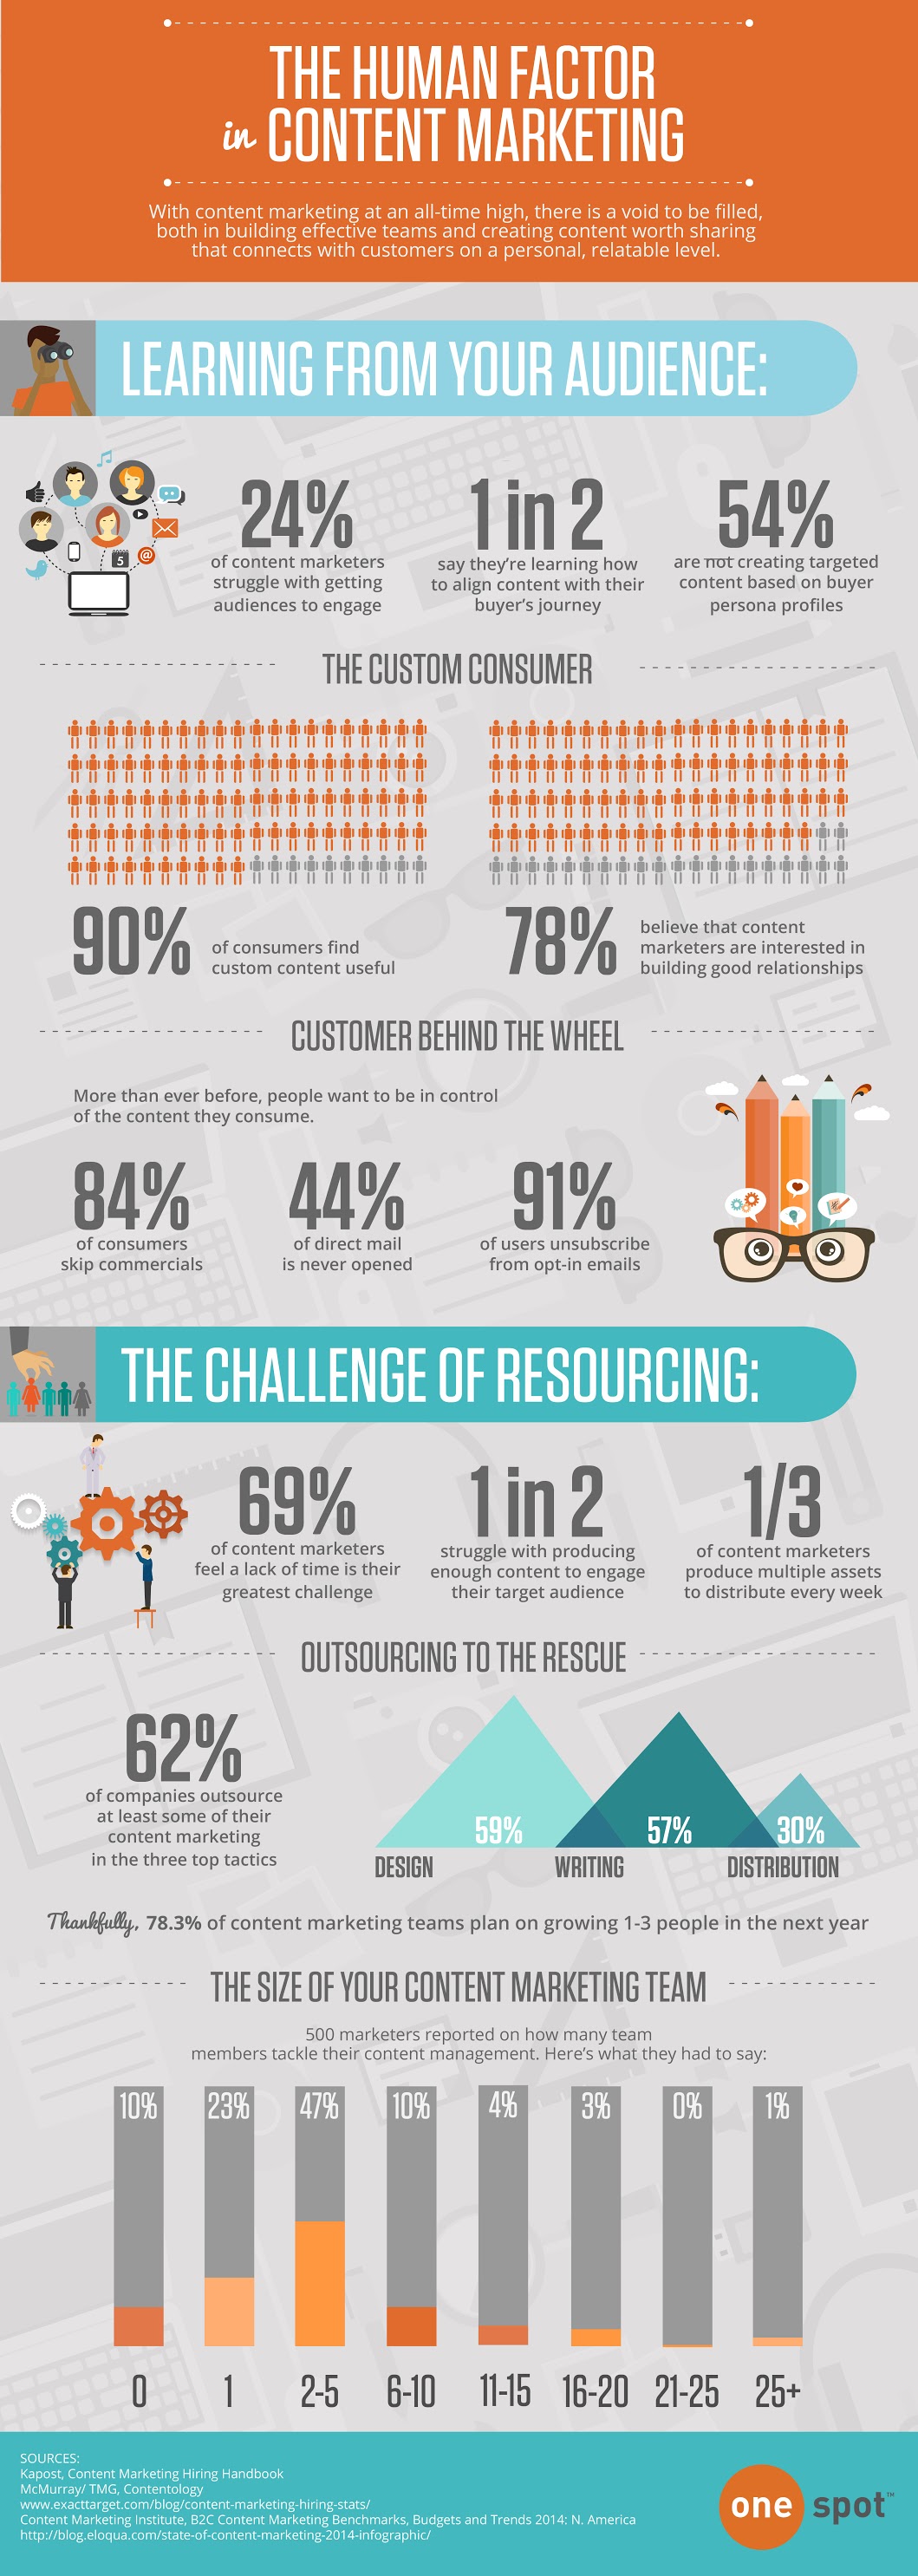 The Human Factor in Content Marketing #infographic